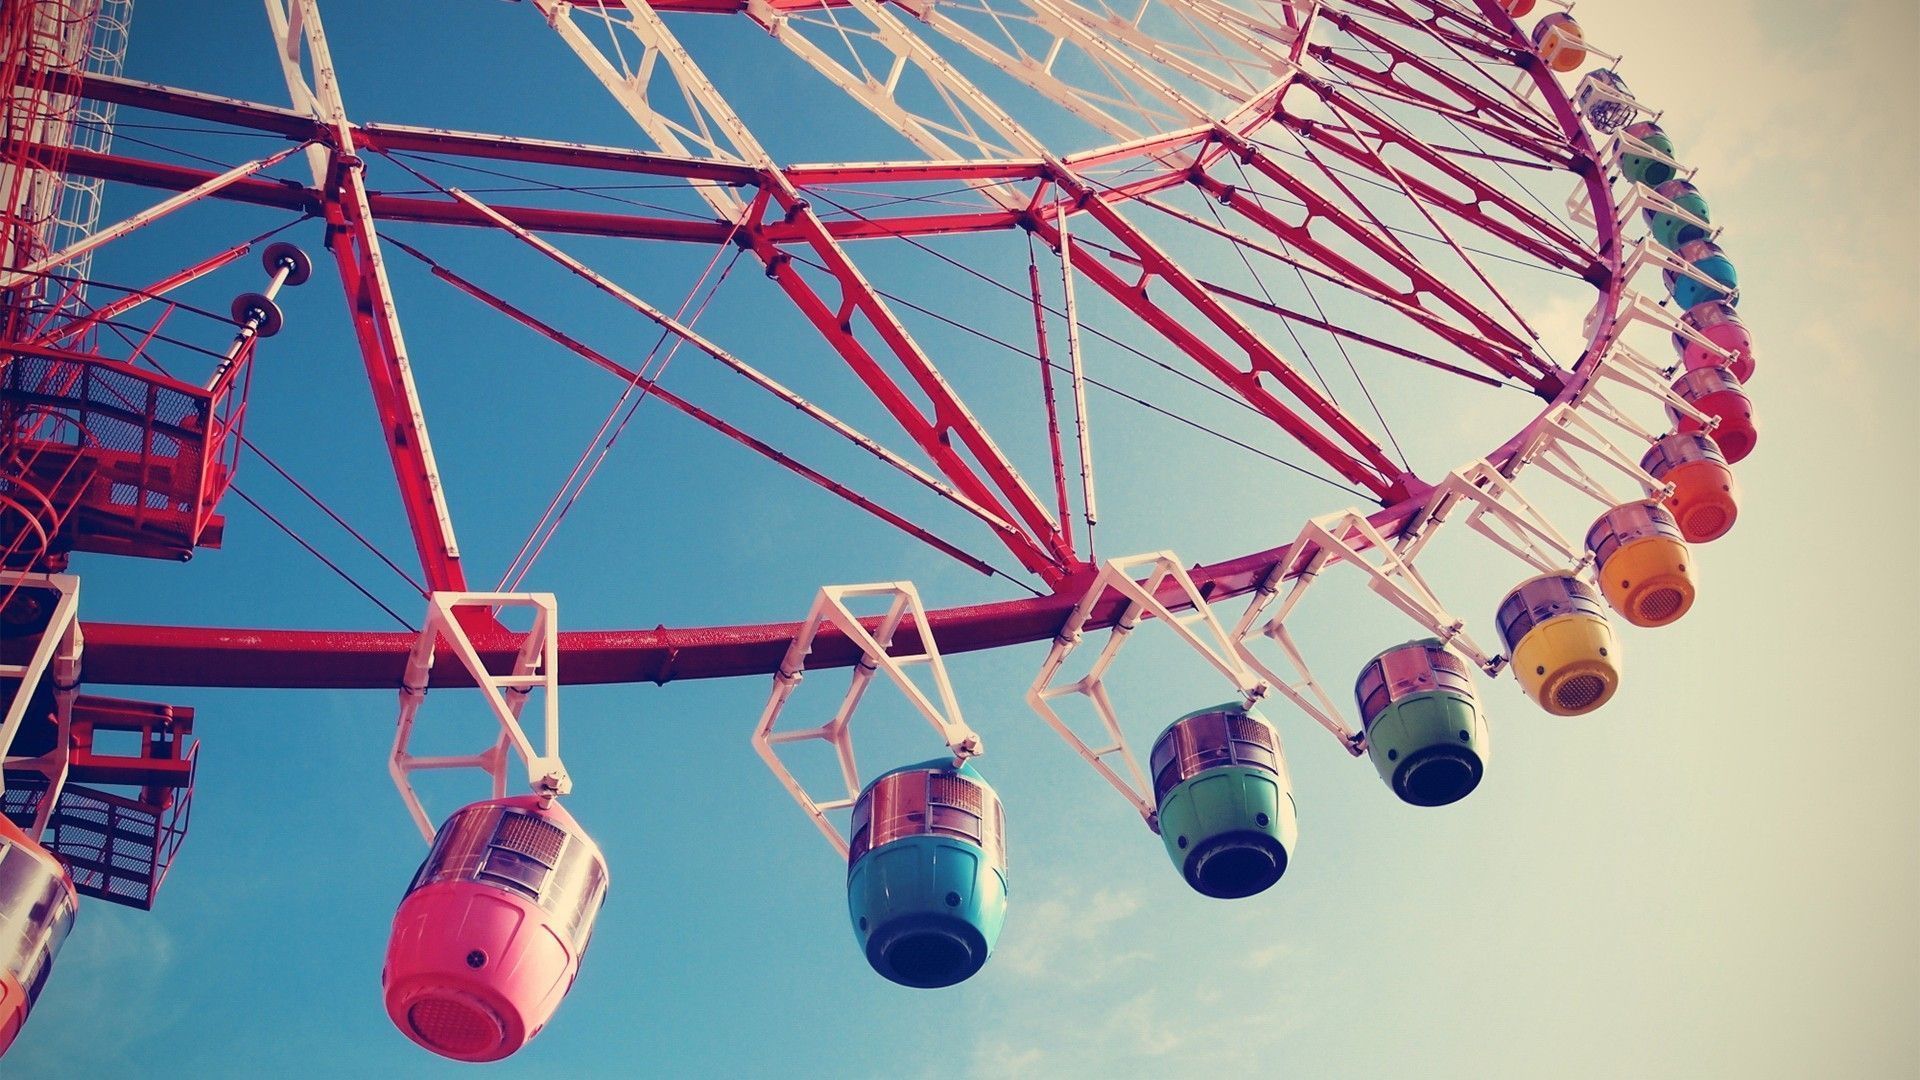 A ferris wheel with many different colors - 1920x1080